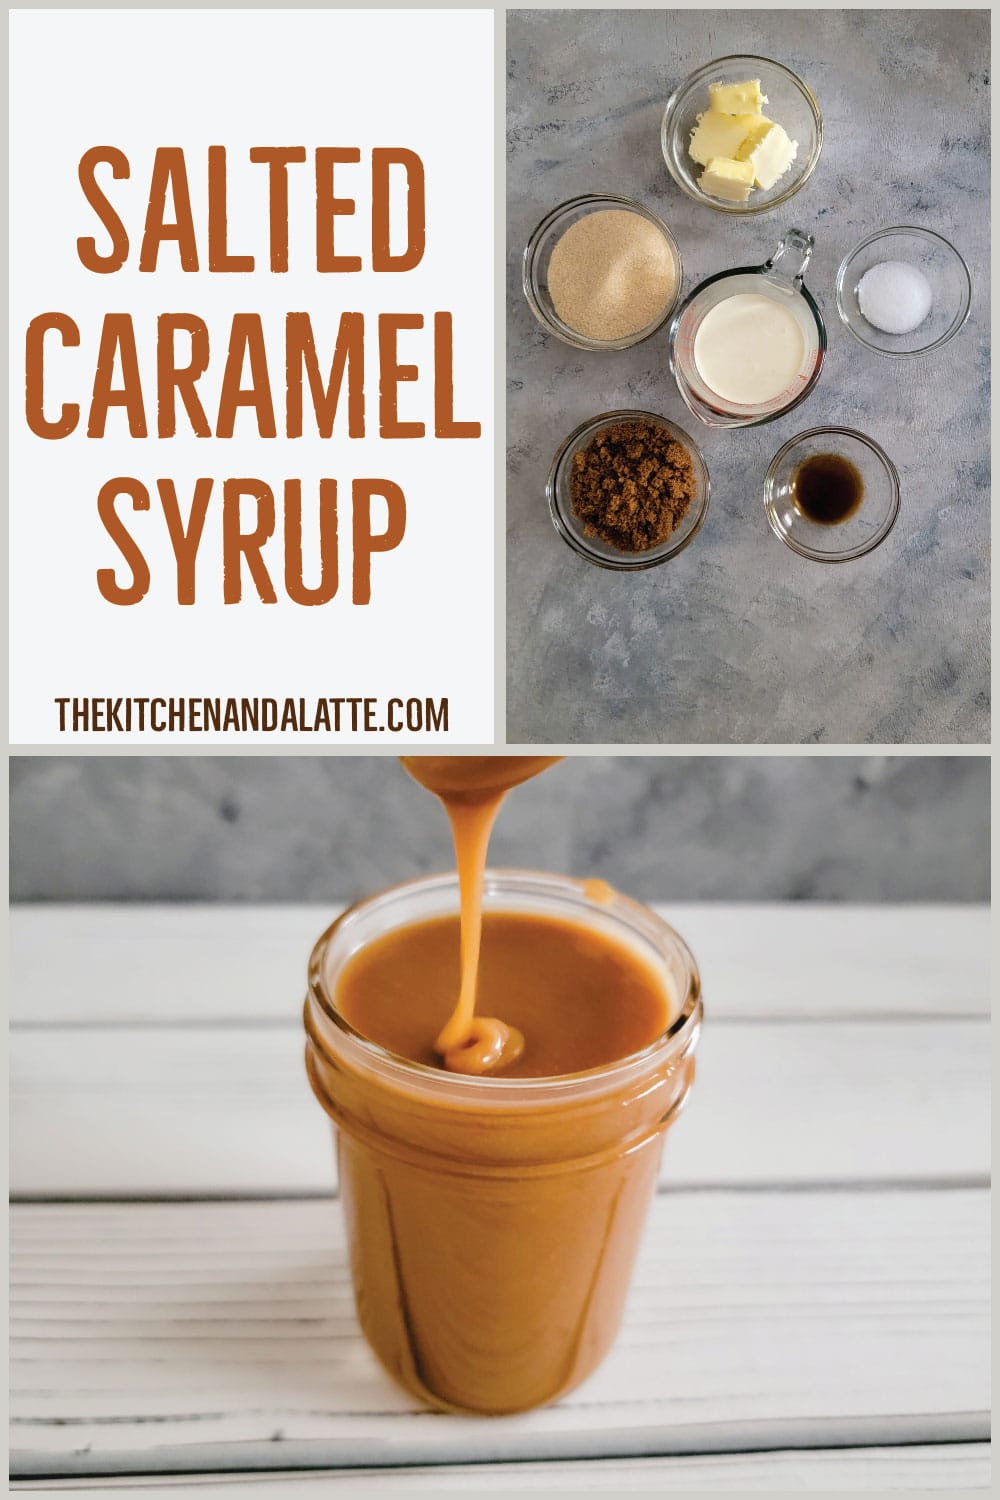 Salted Caramel Syrup Pinterest image - 2 pictures. One is caramel in a jar with some dripping off of a spoon and the other is the ingredients in prep bowls.